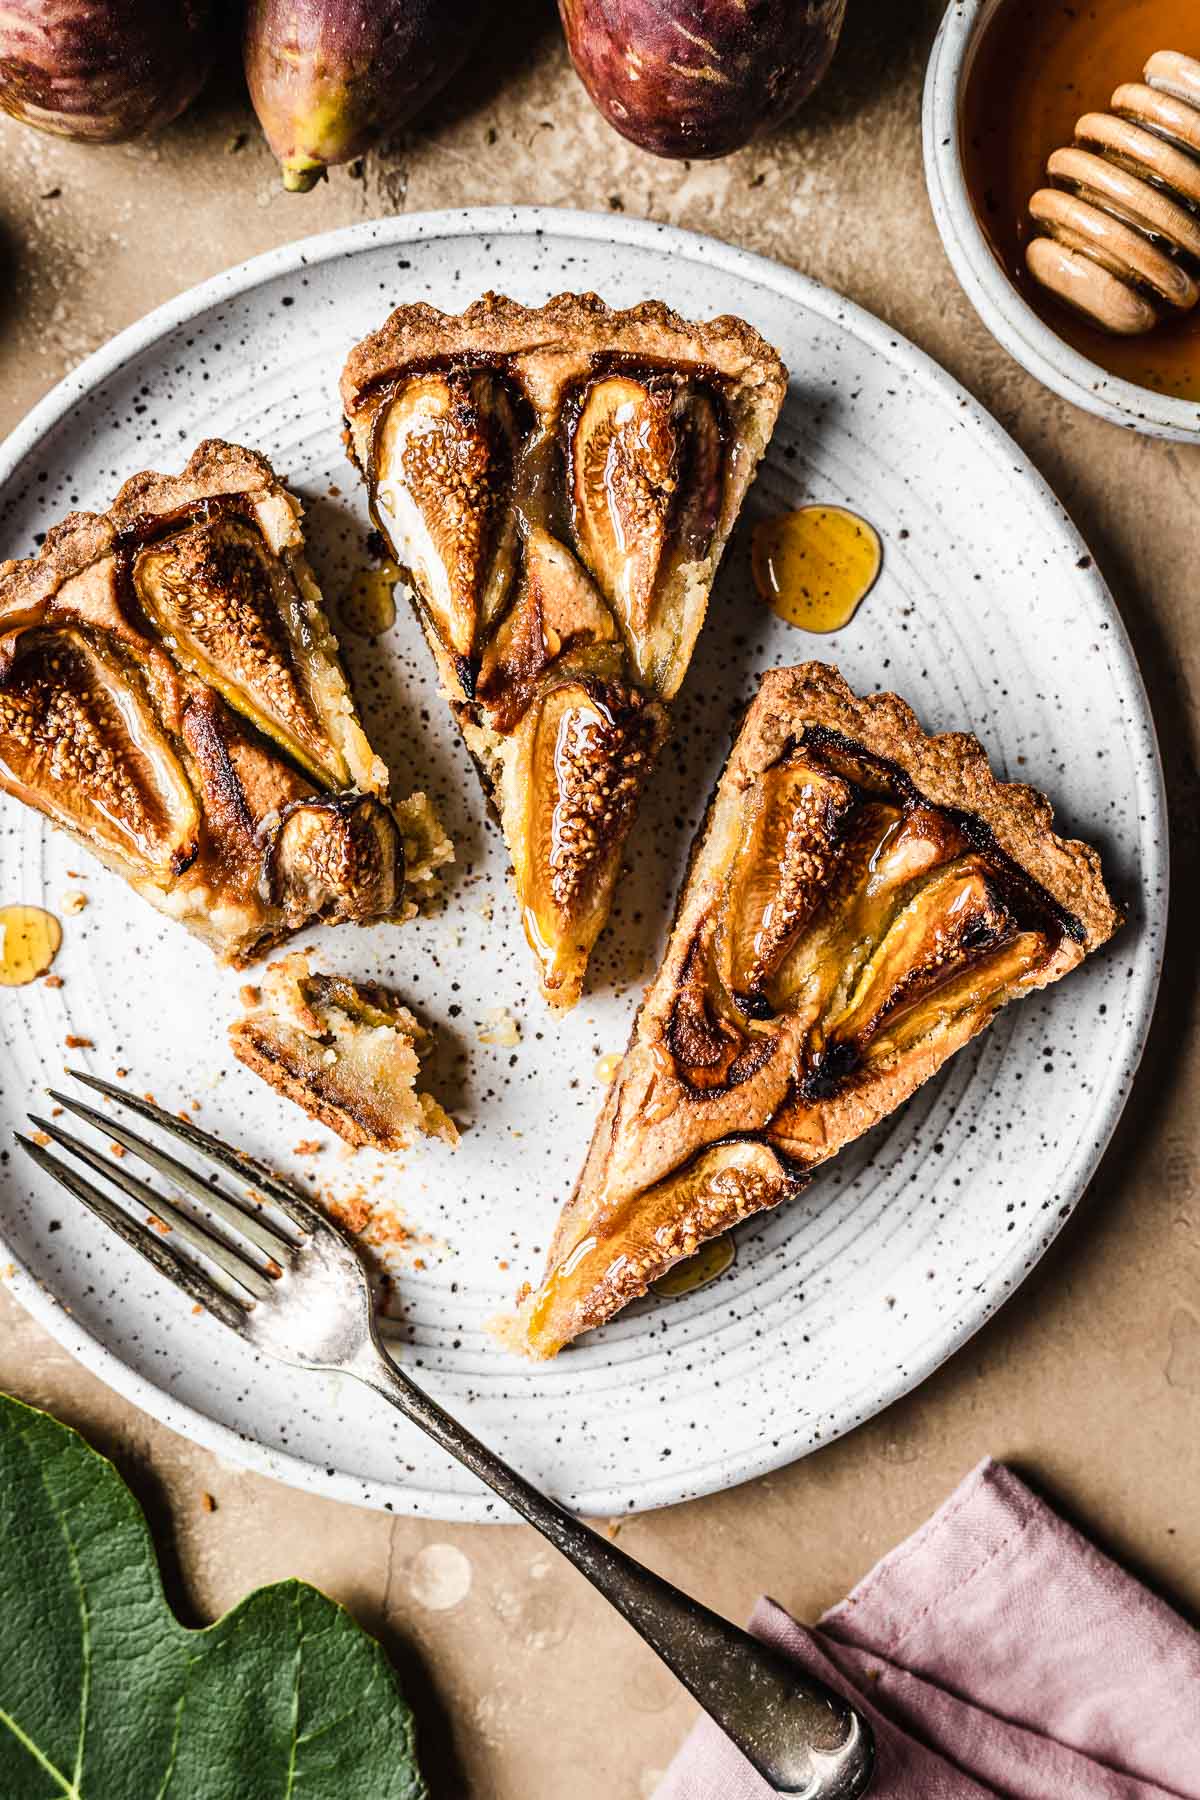 Three slices of tarte aux figues (fFrench fig tart) on a white speckled ceramic plate.